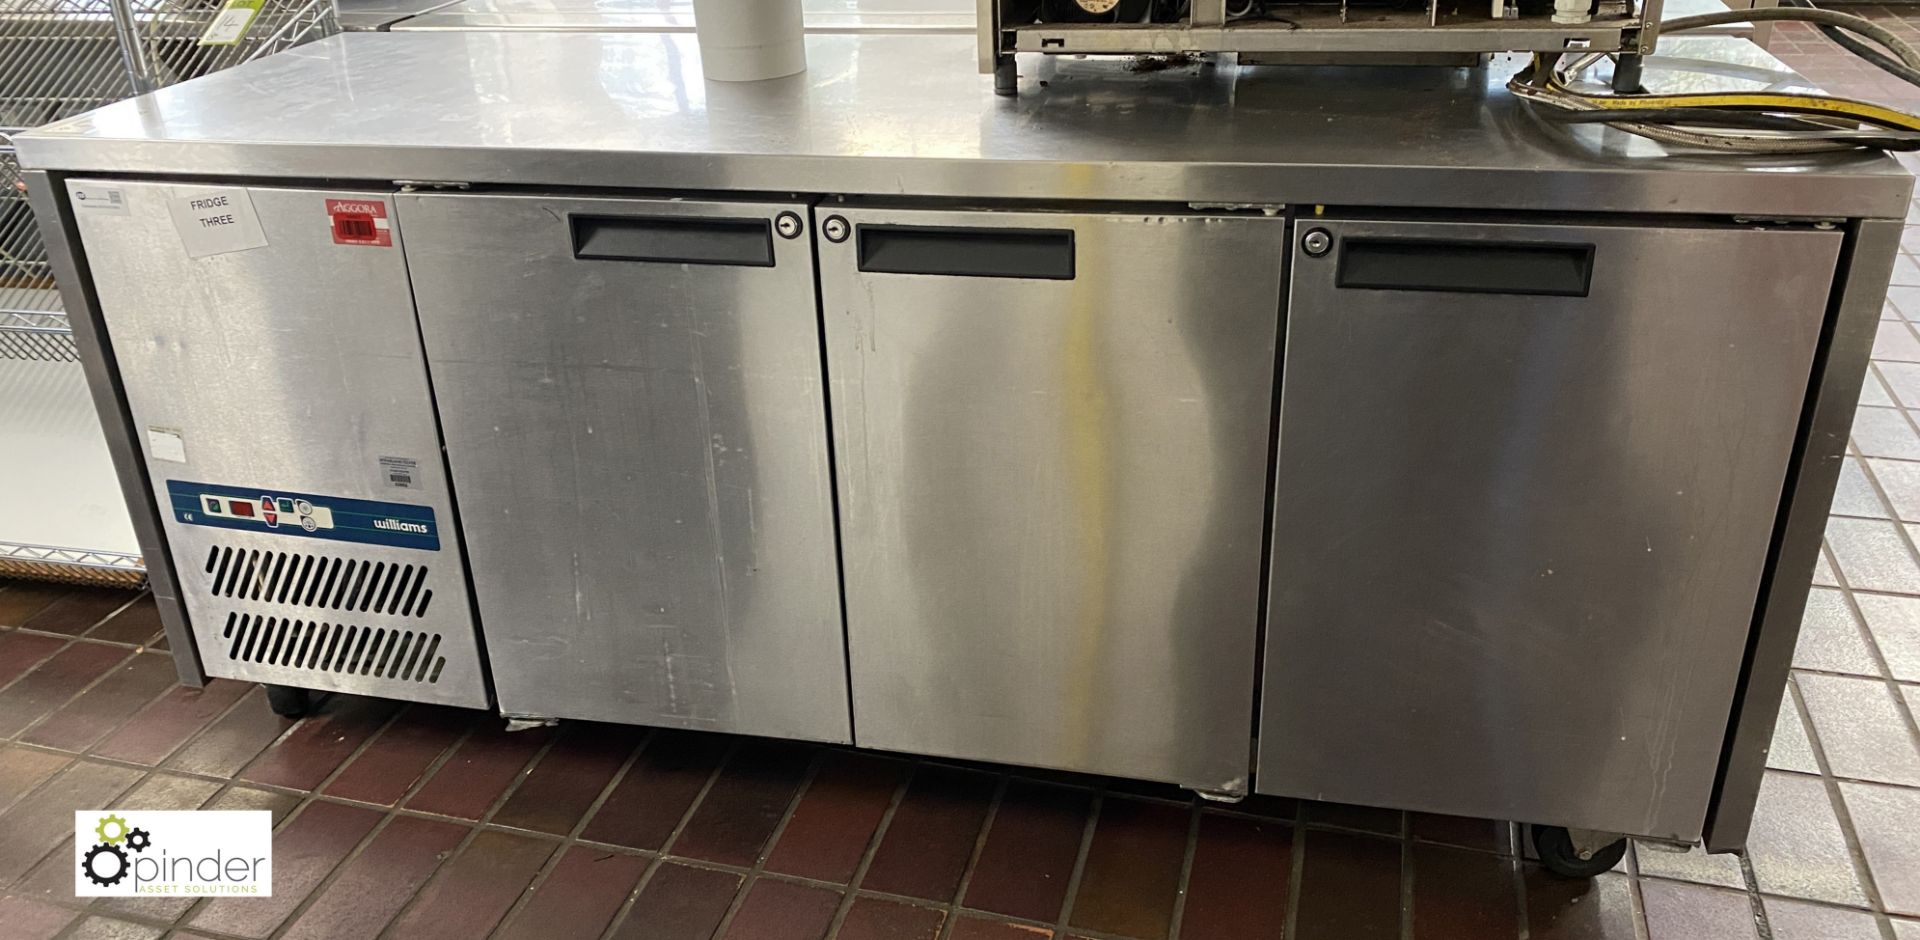 Williams stainless steel mobile triple door Chilled Counter, 240volts, 1900mm x 650mm x 860mm,